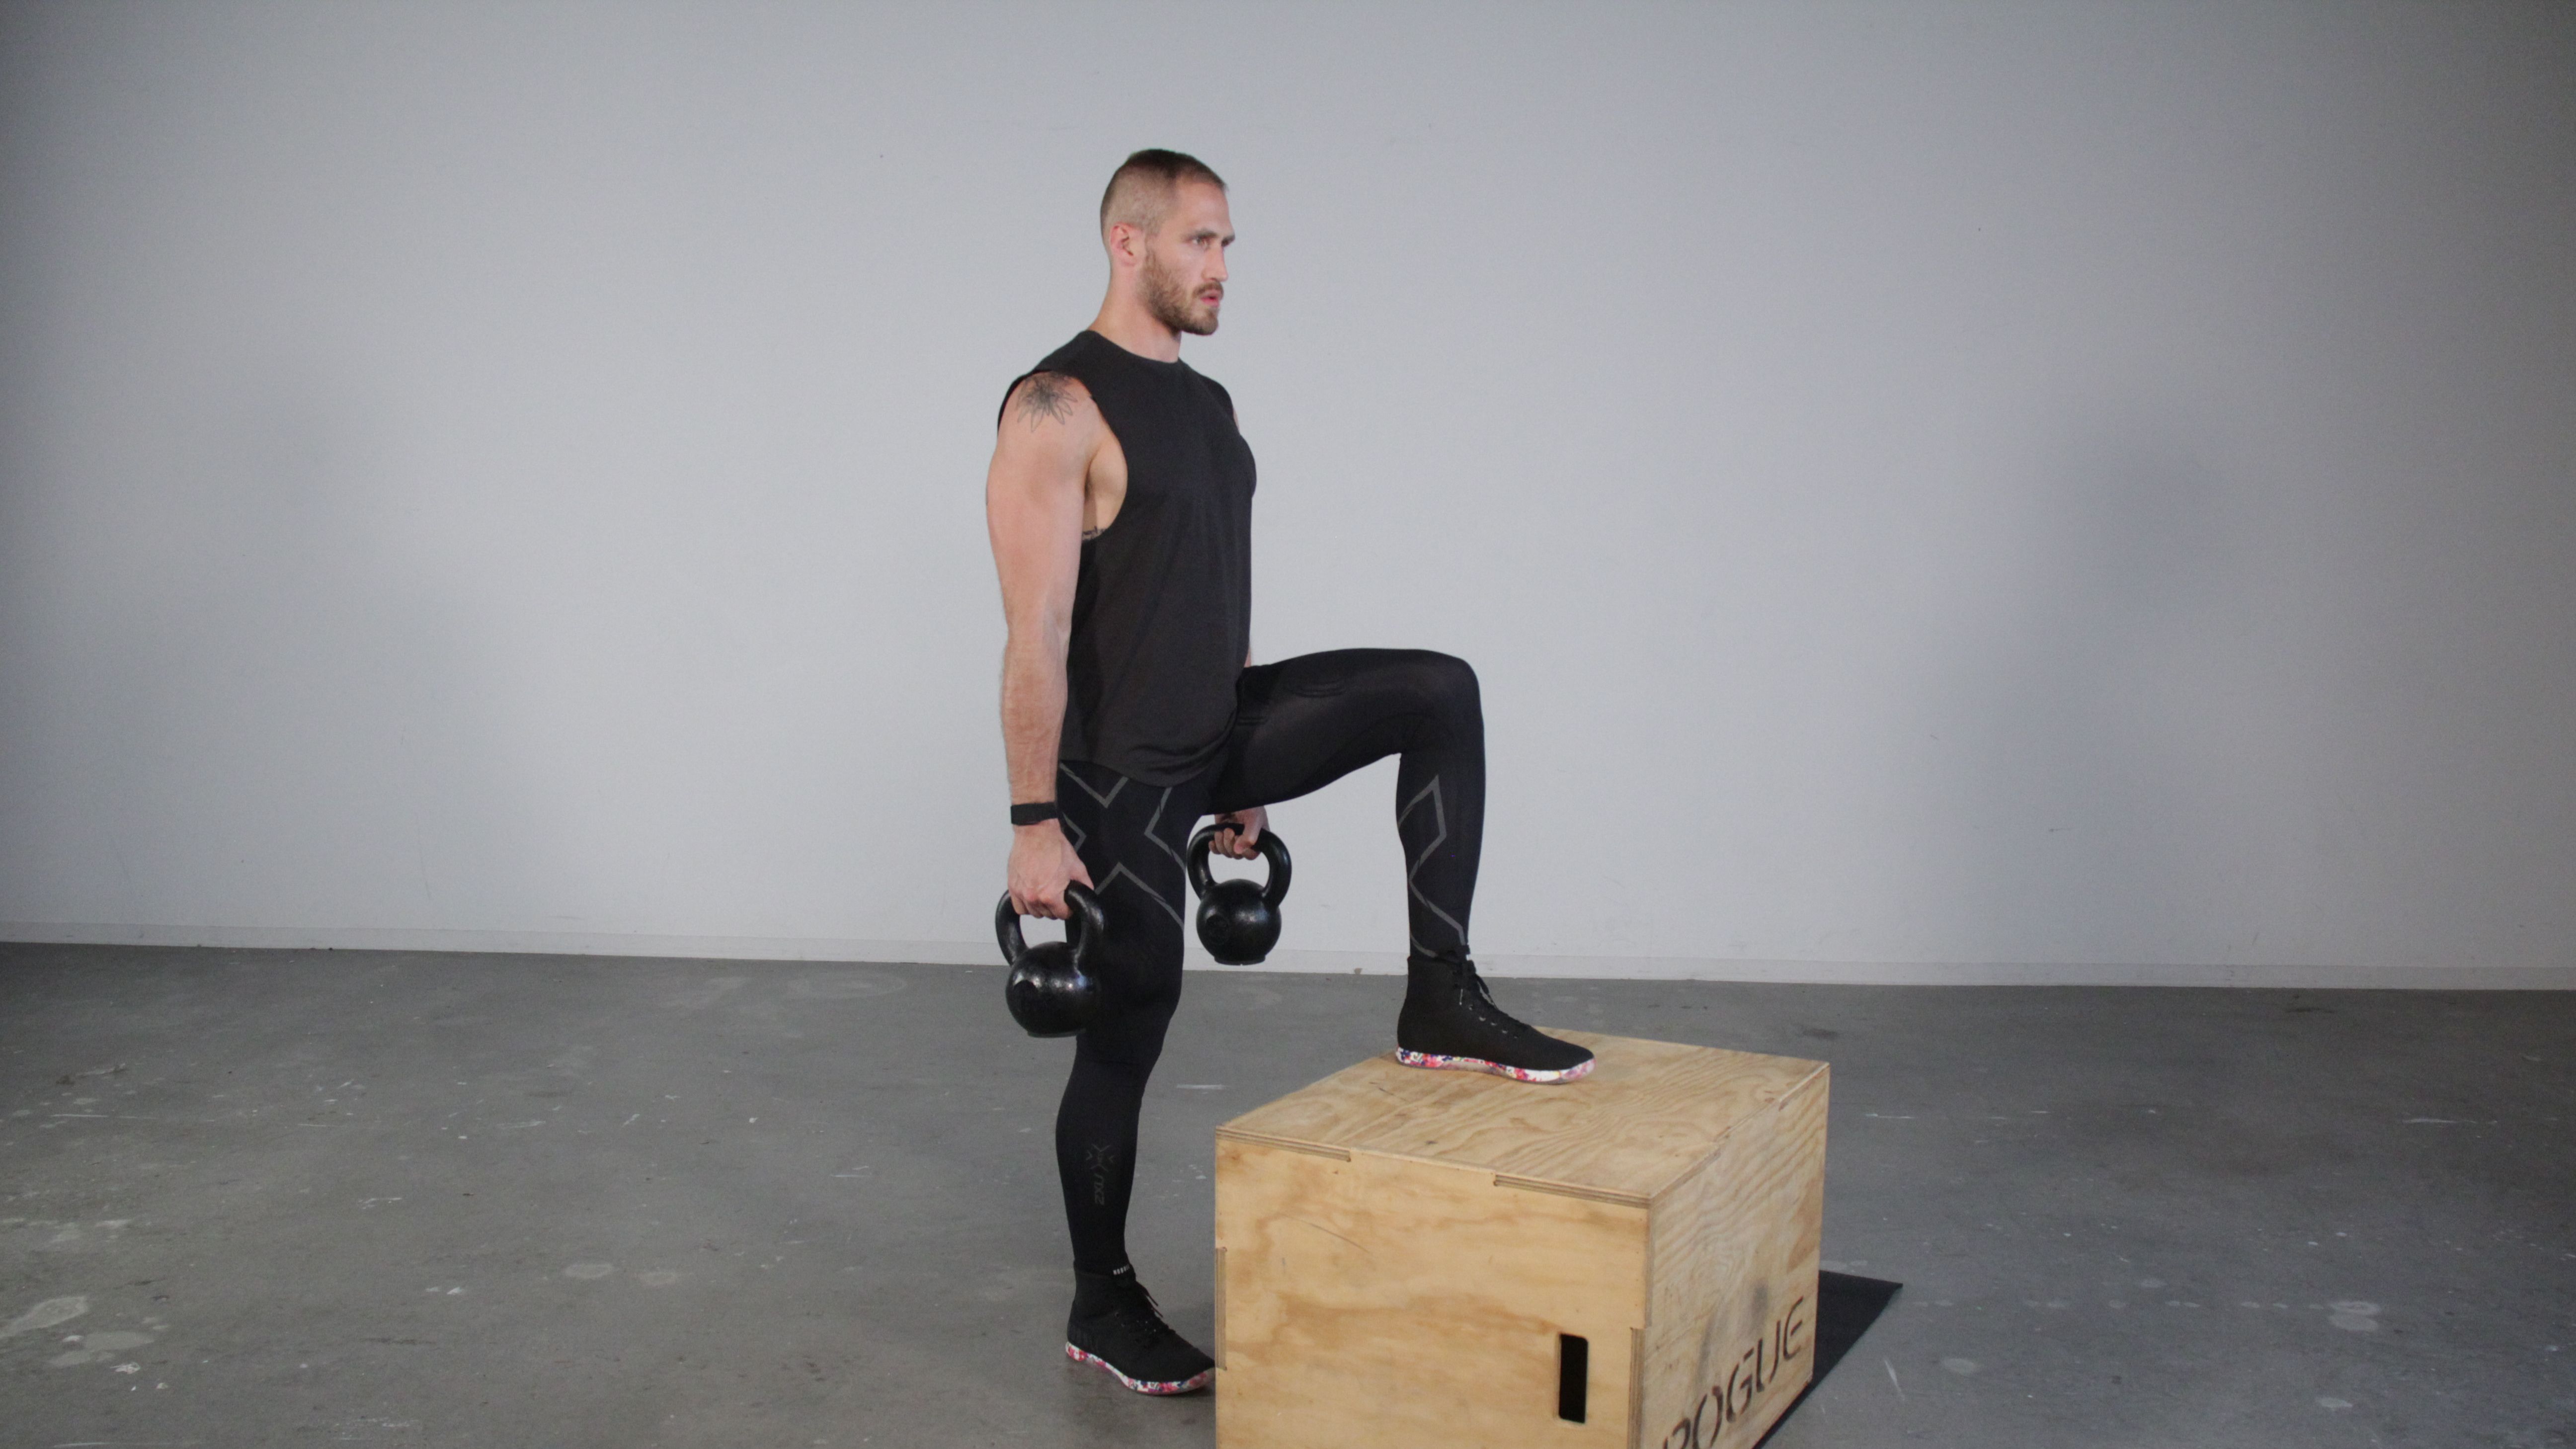 How Step Up Single-Leg Exercise Can Build Lower Body Strength